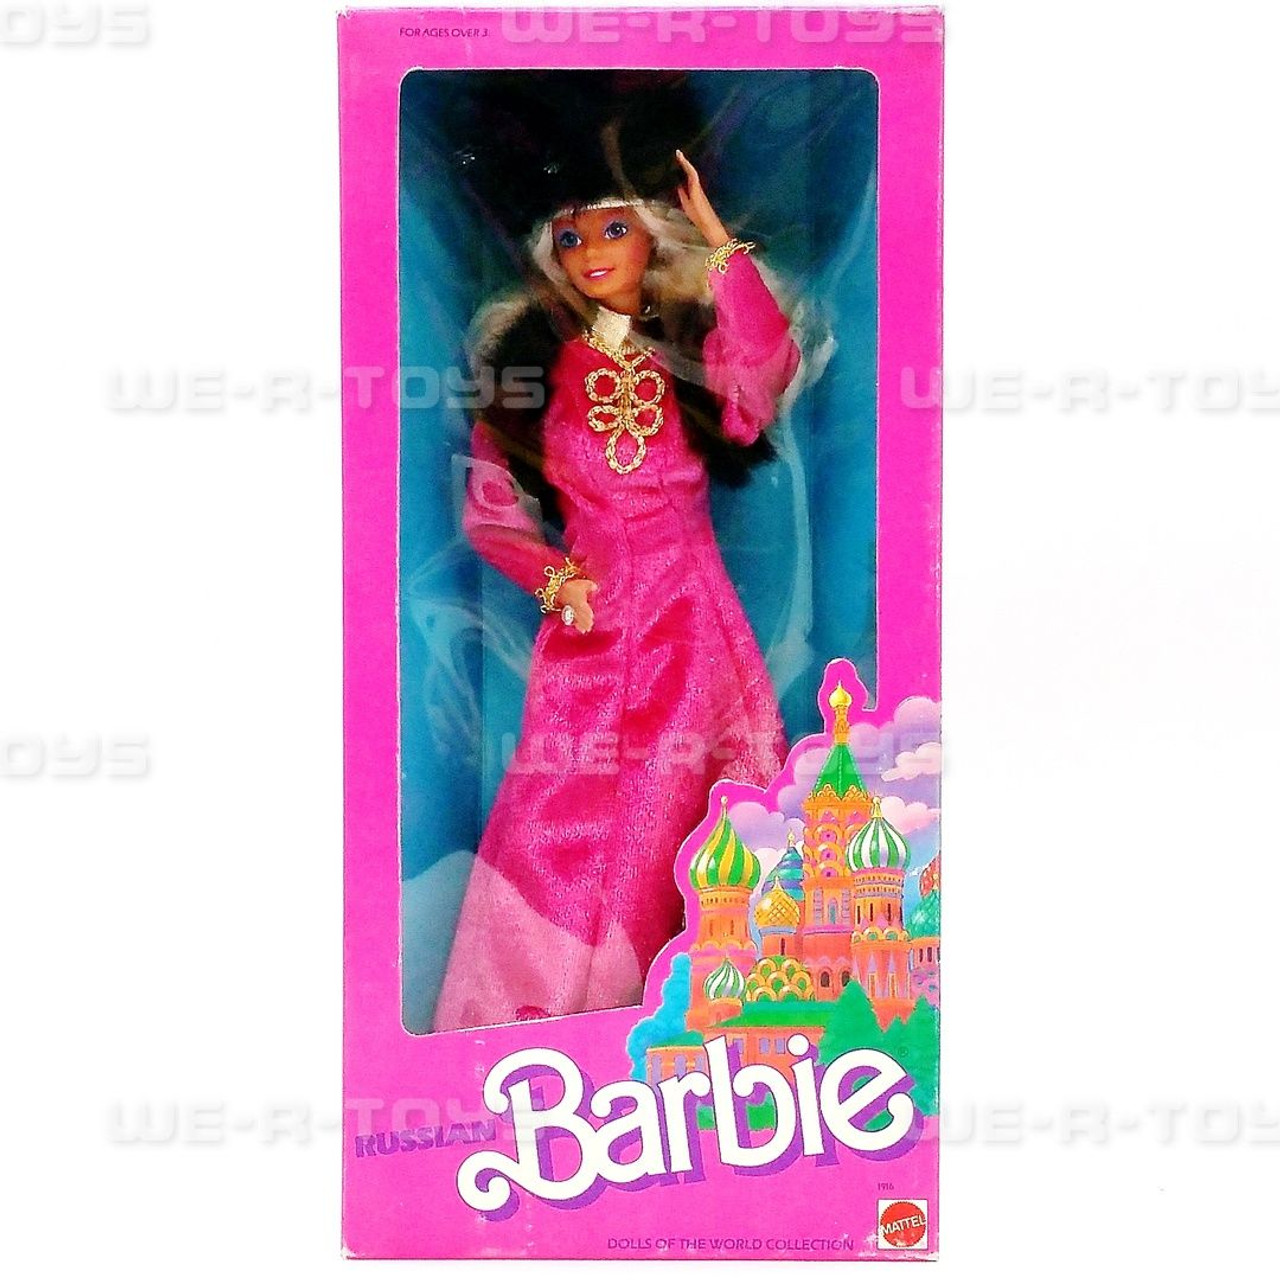 Mattel announces limited-edition 'Weird Barbie' doll for sale